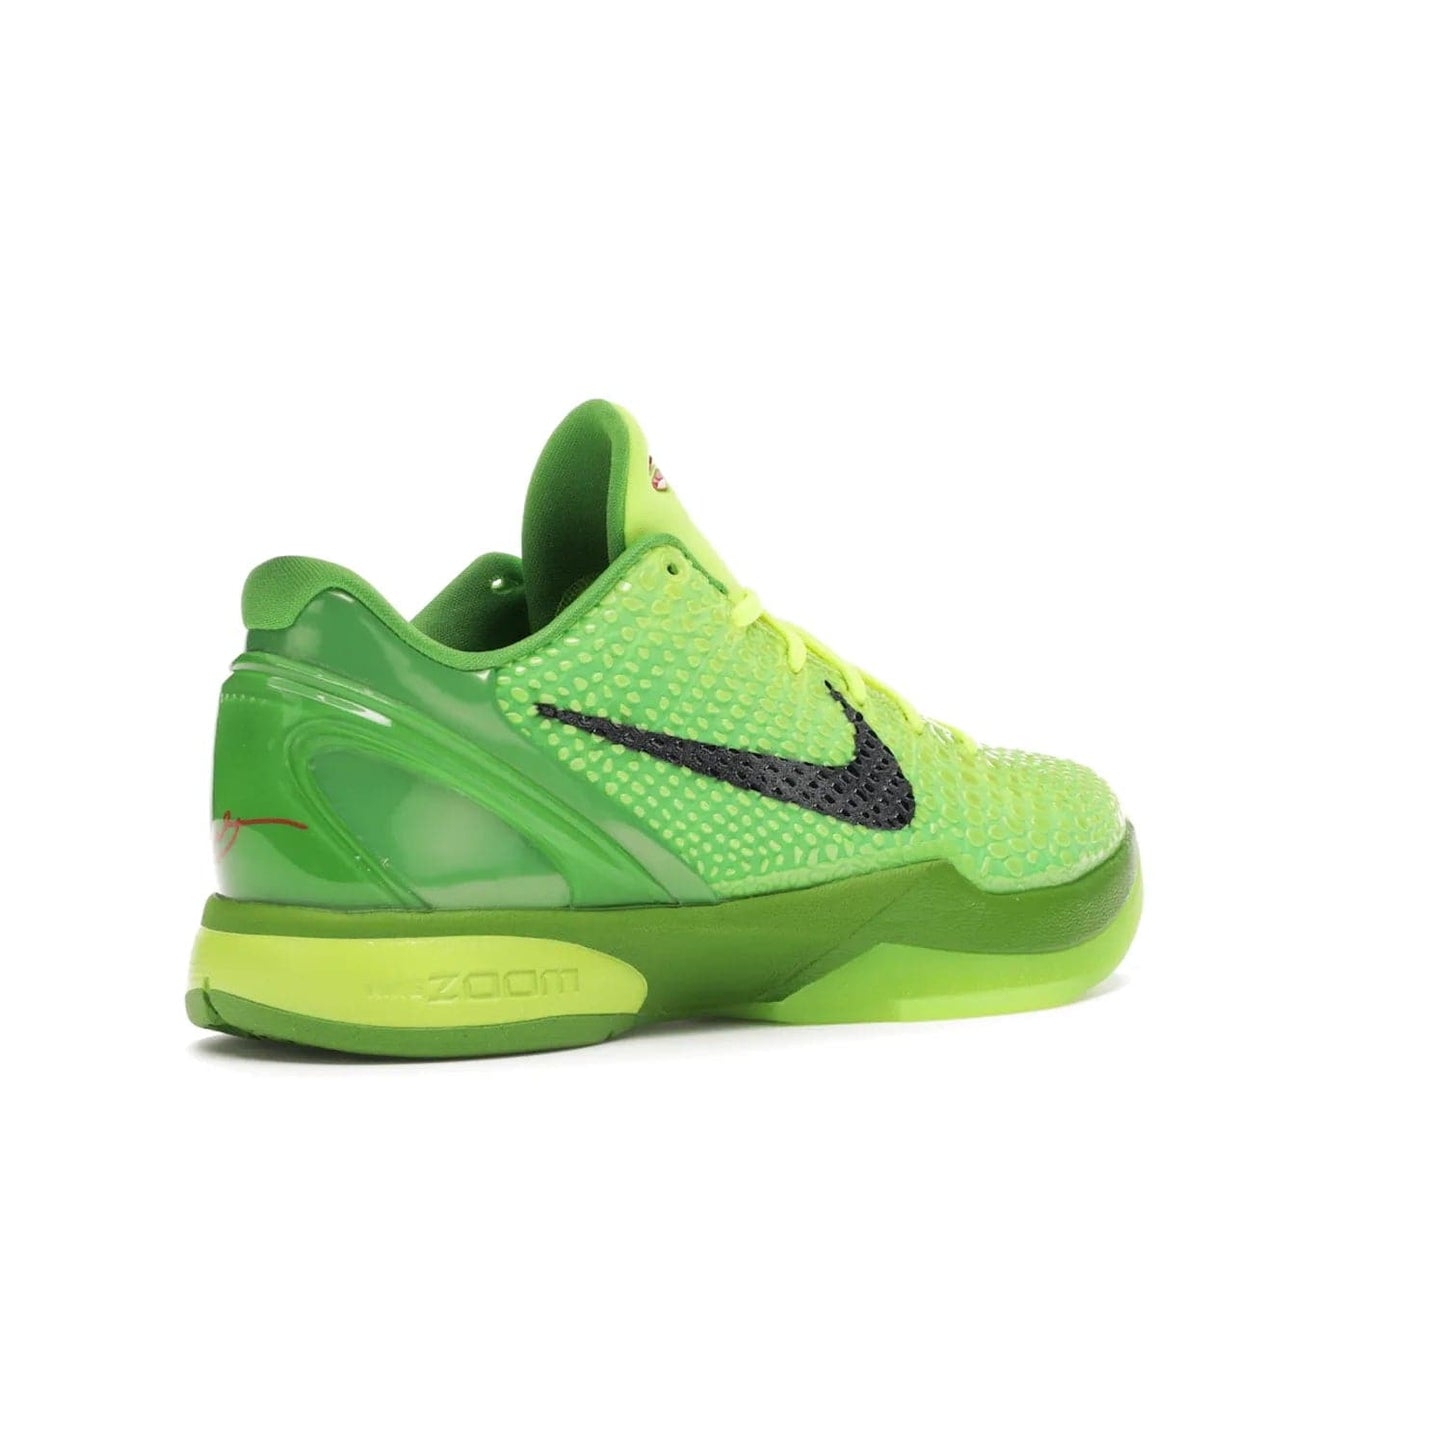 Nike Kobe 6 Protro Grinch (2020) - Image 33 - Only at www.BallersClubKickz.com - #
The Nike Kobe 6 Protro Grinch updates the iconic 2011 design with modern tech like a Zoom Air cushioning system, scaled-down traction, and updated silhouette. Experience the textured Green Apple and Volt upper plus bright red and green accents for $180.